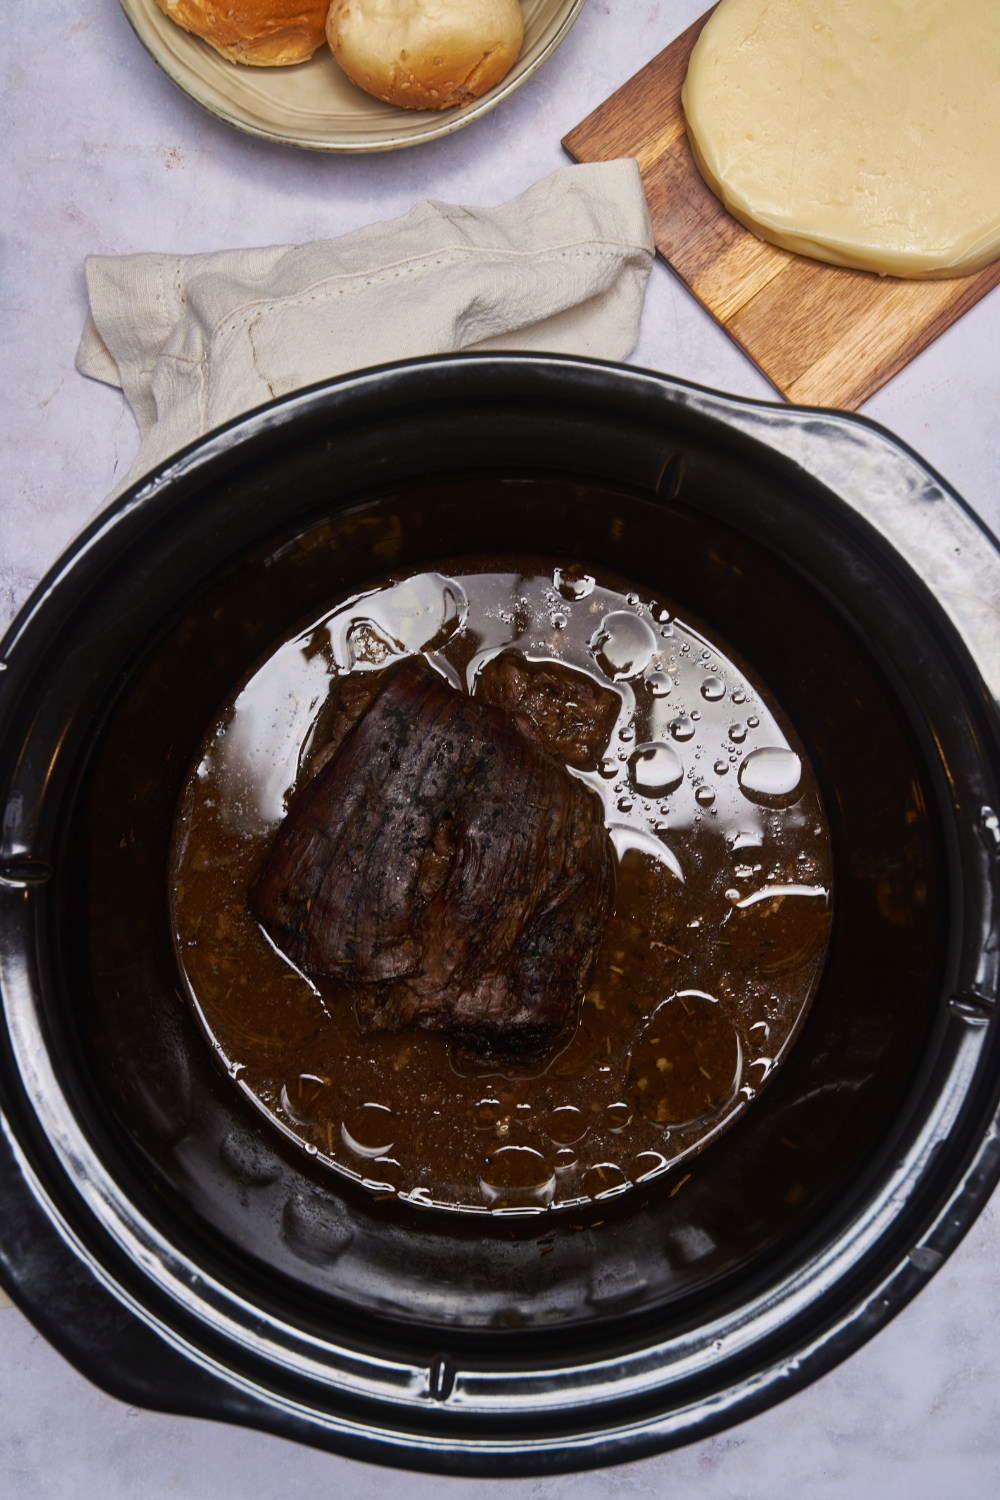 A black crockpot filled with cooked tri tip in a brown gravy.